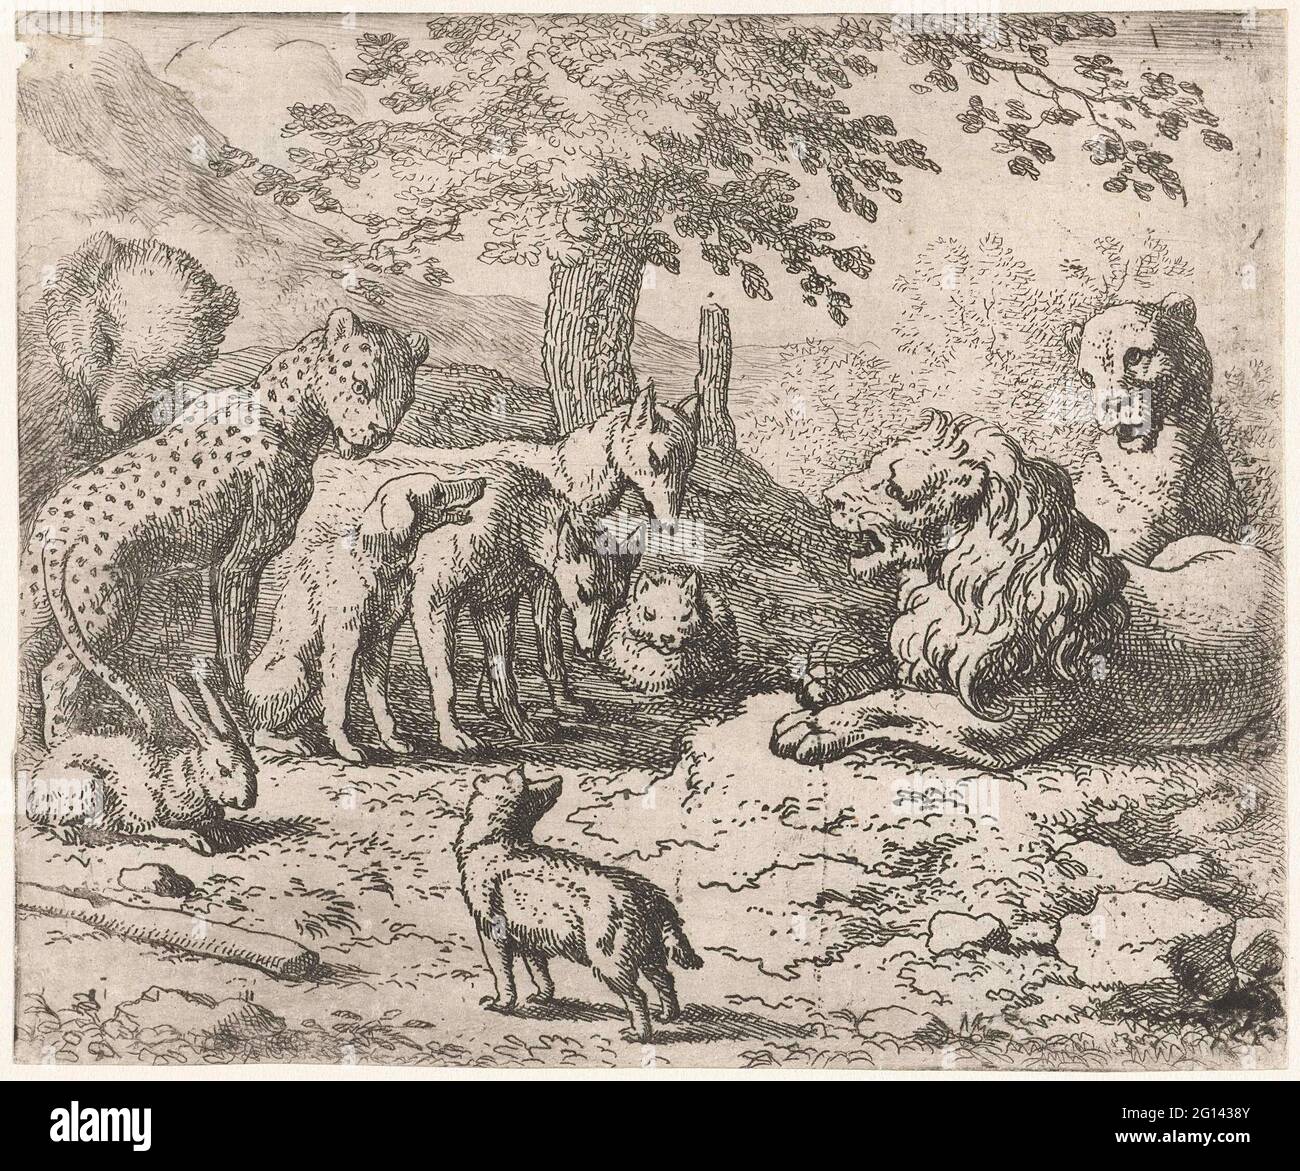 Consulting of King Nobel; Reinaert de Vos. The lion, king Nobel, deliberates with the other animals, including Fyrapel the leopard, bruun the bear and cuwaert the rabbit. Stock Photo